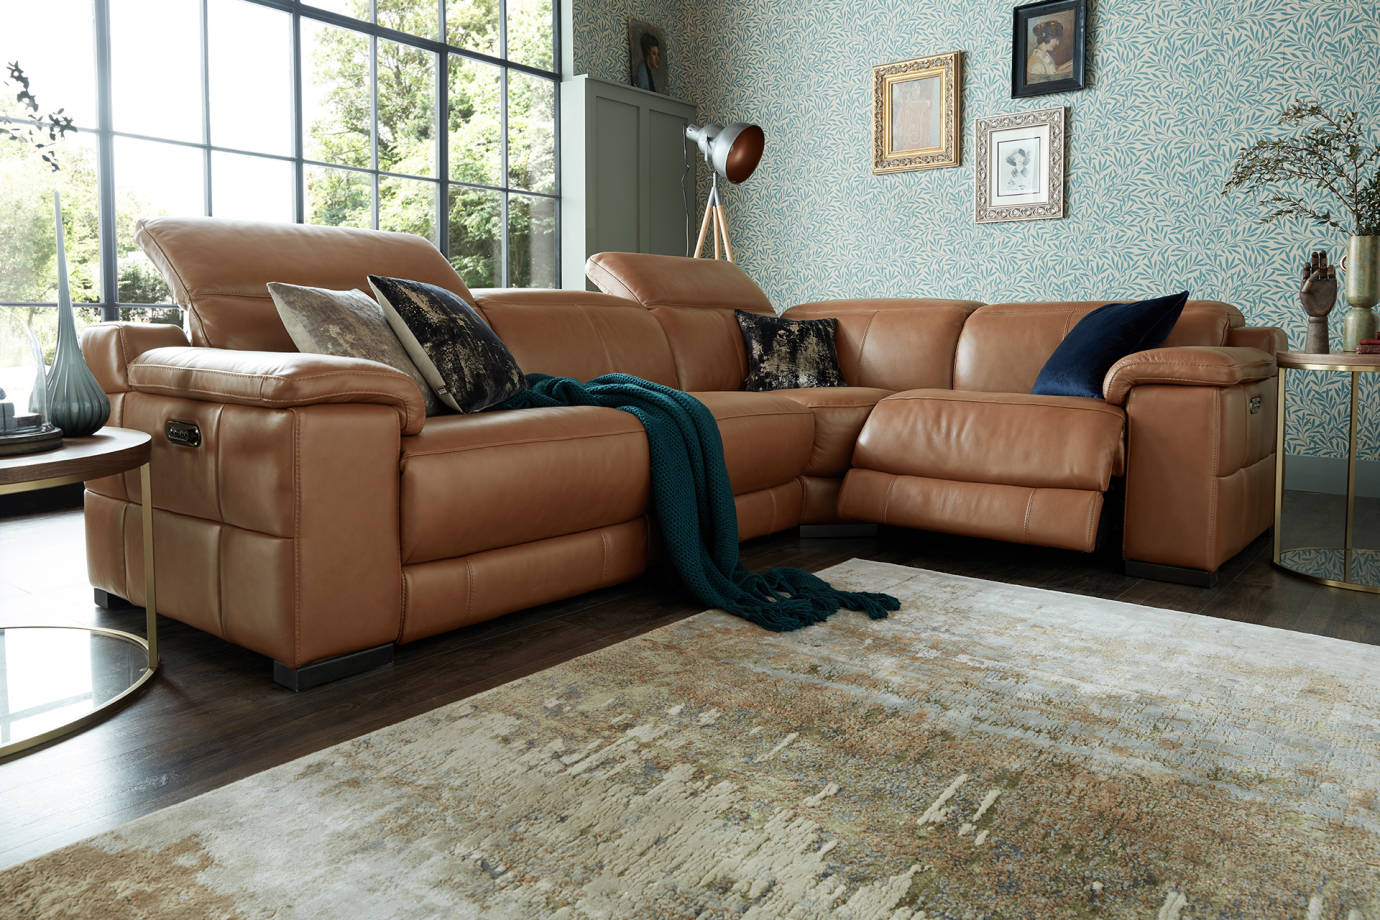 Recliner Sofas Leather Fabric And, Beige Leather Recliner Sofa Set